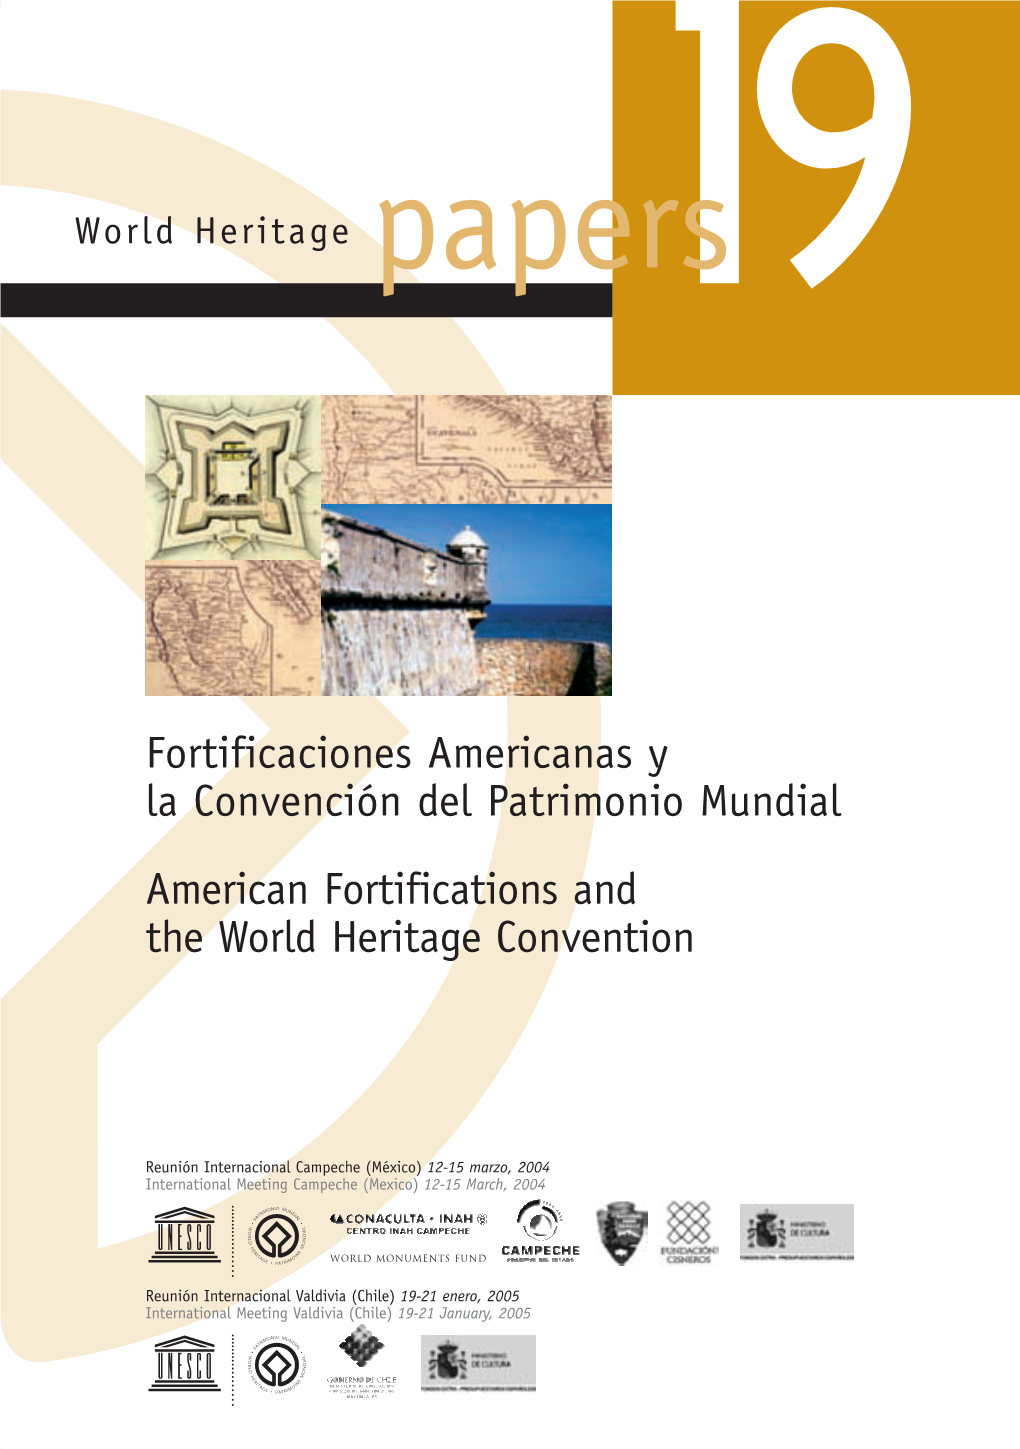 World Heritage Papers 19